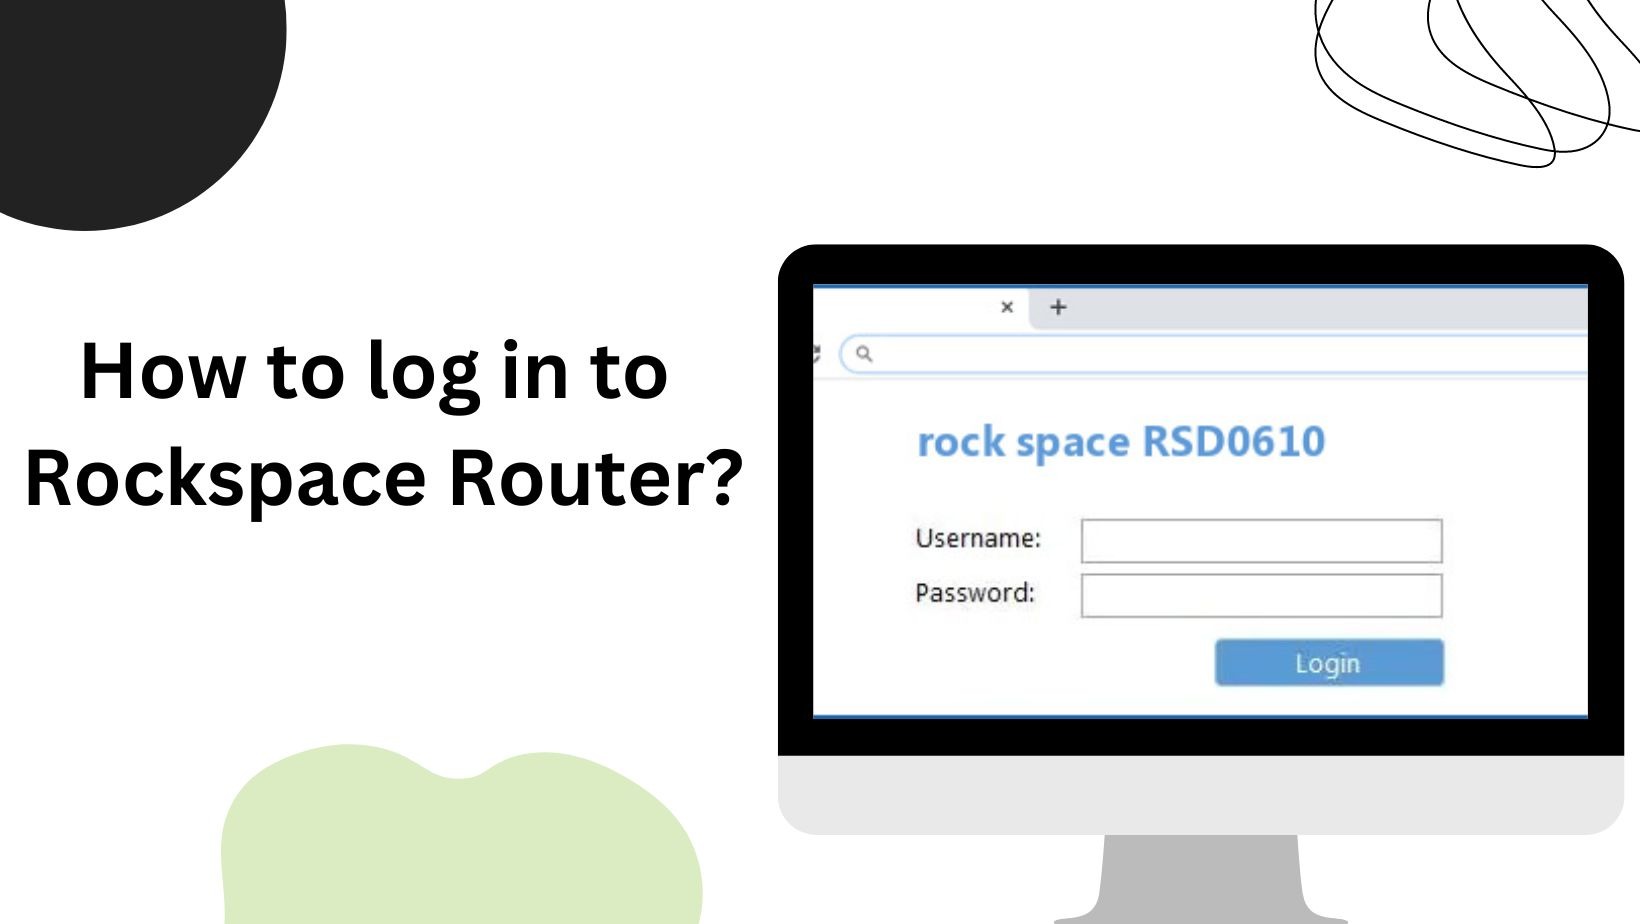 How to log in to Rockspace Router?